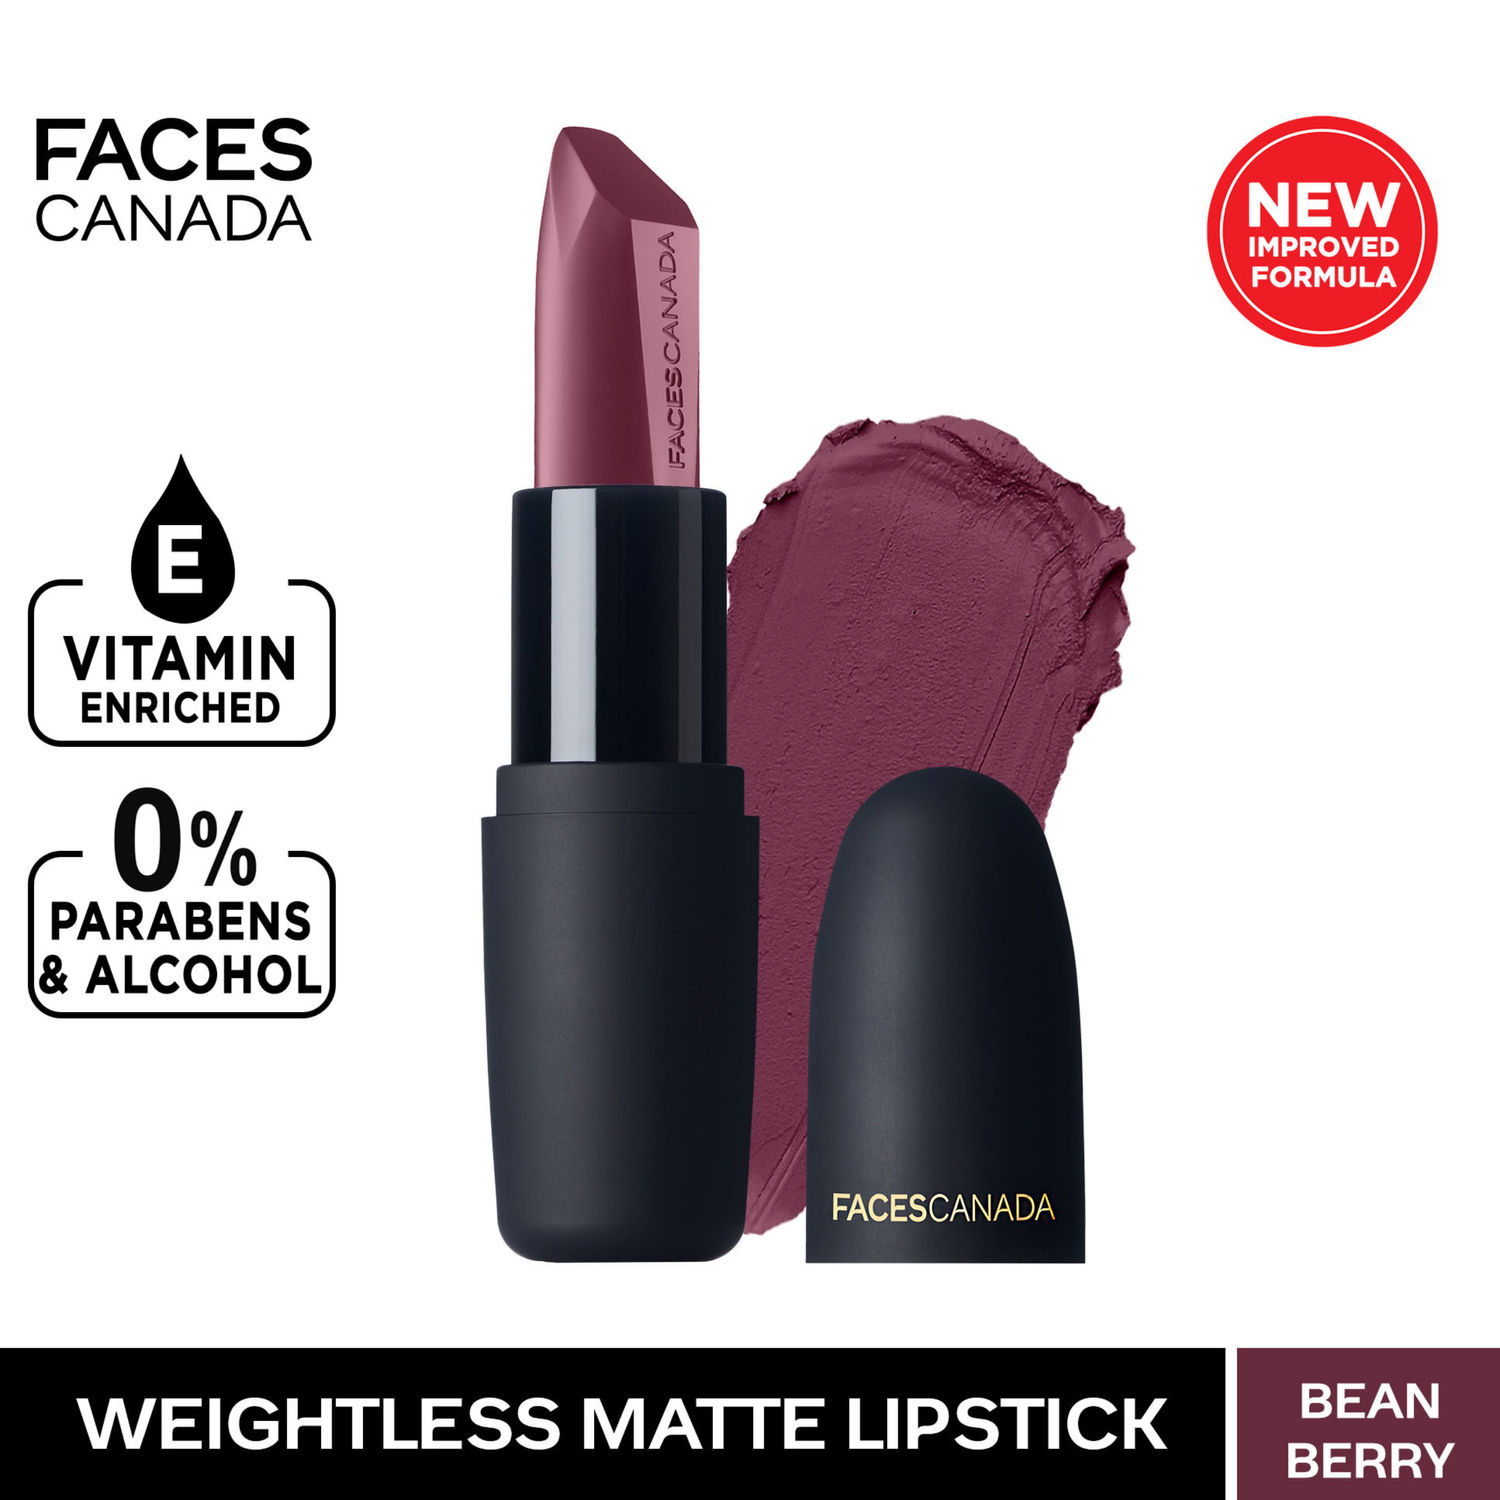 Buy Faces Canada Weightless Matte Lipstick |Jojoba and Almond Oil enriched| Highly pigmented | Smooth One Stroke Weightless Color | Keeps Lips Moisturized | Shade - Bean Berry 4g - Purplle